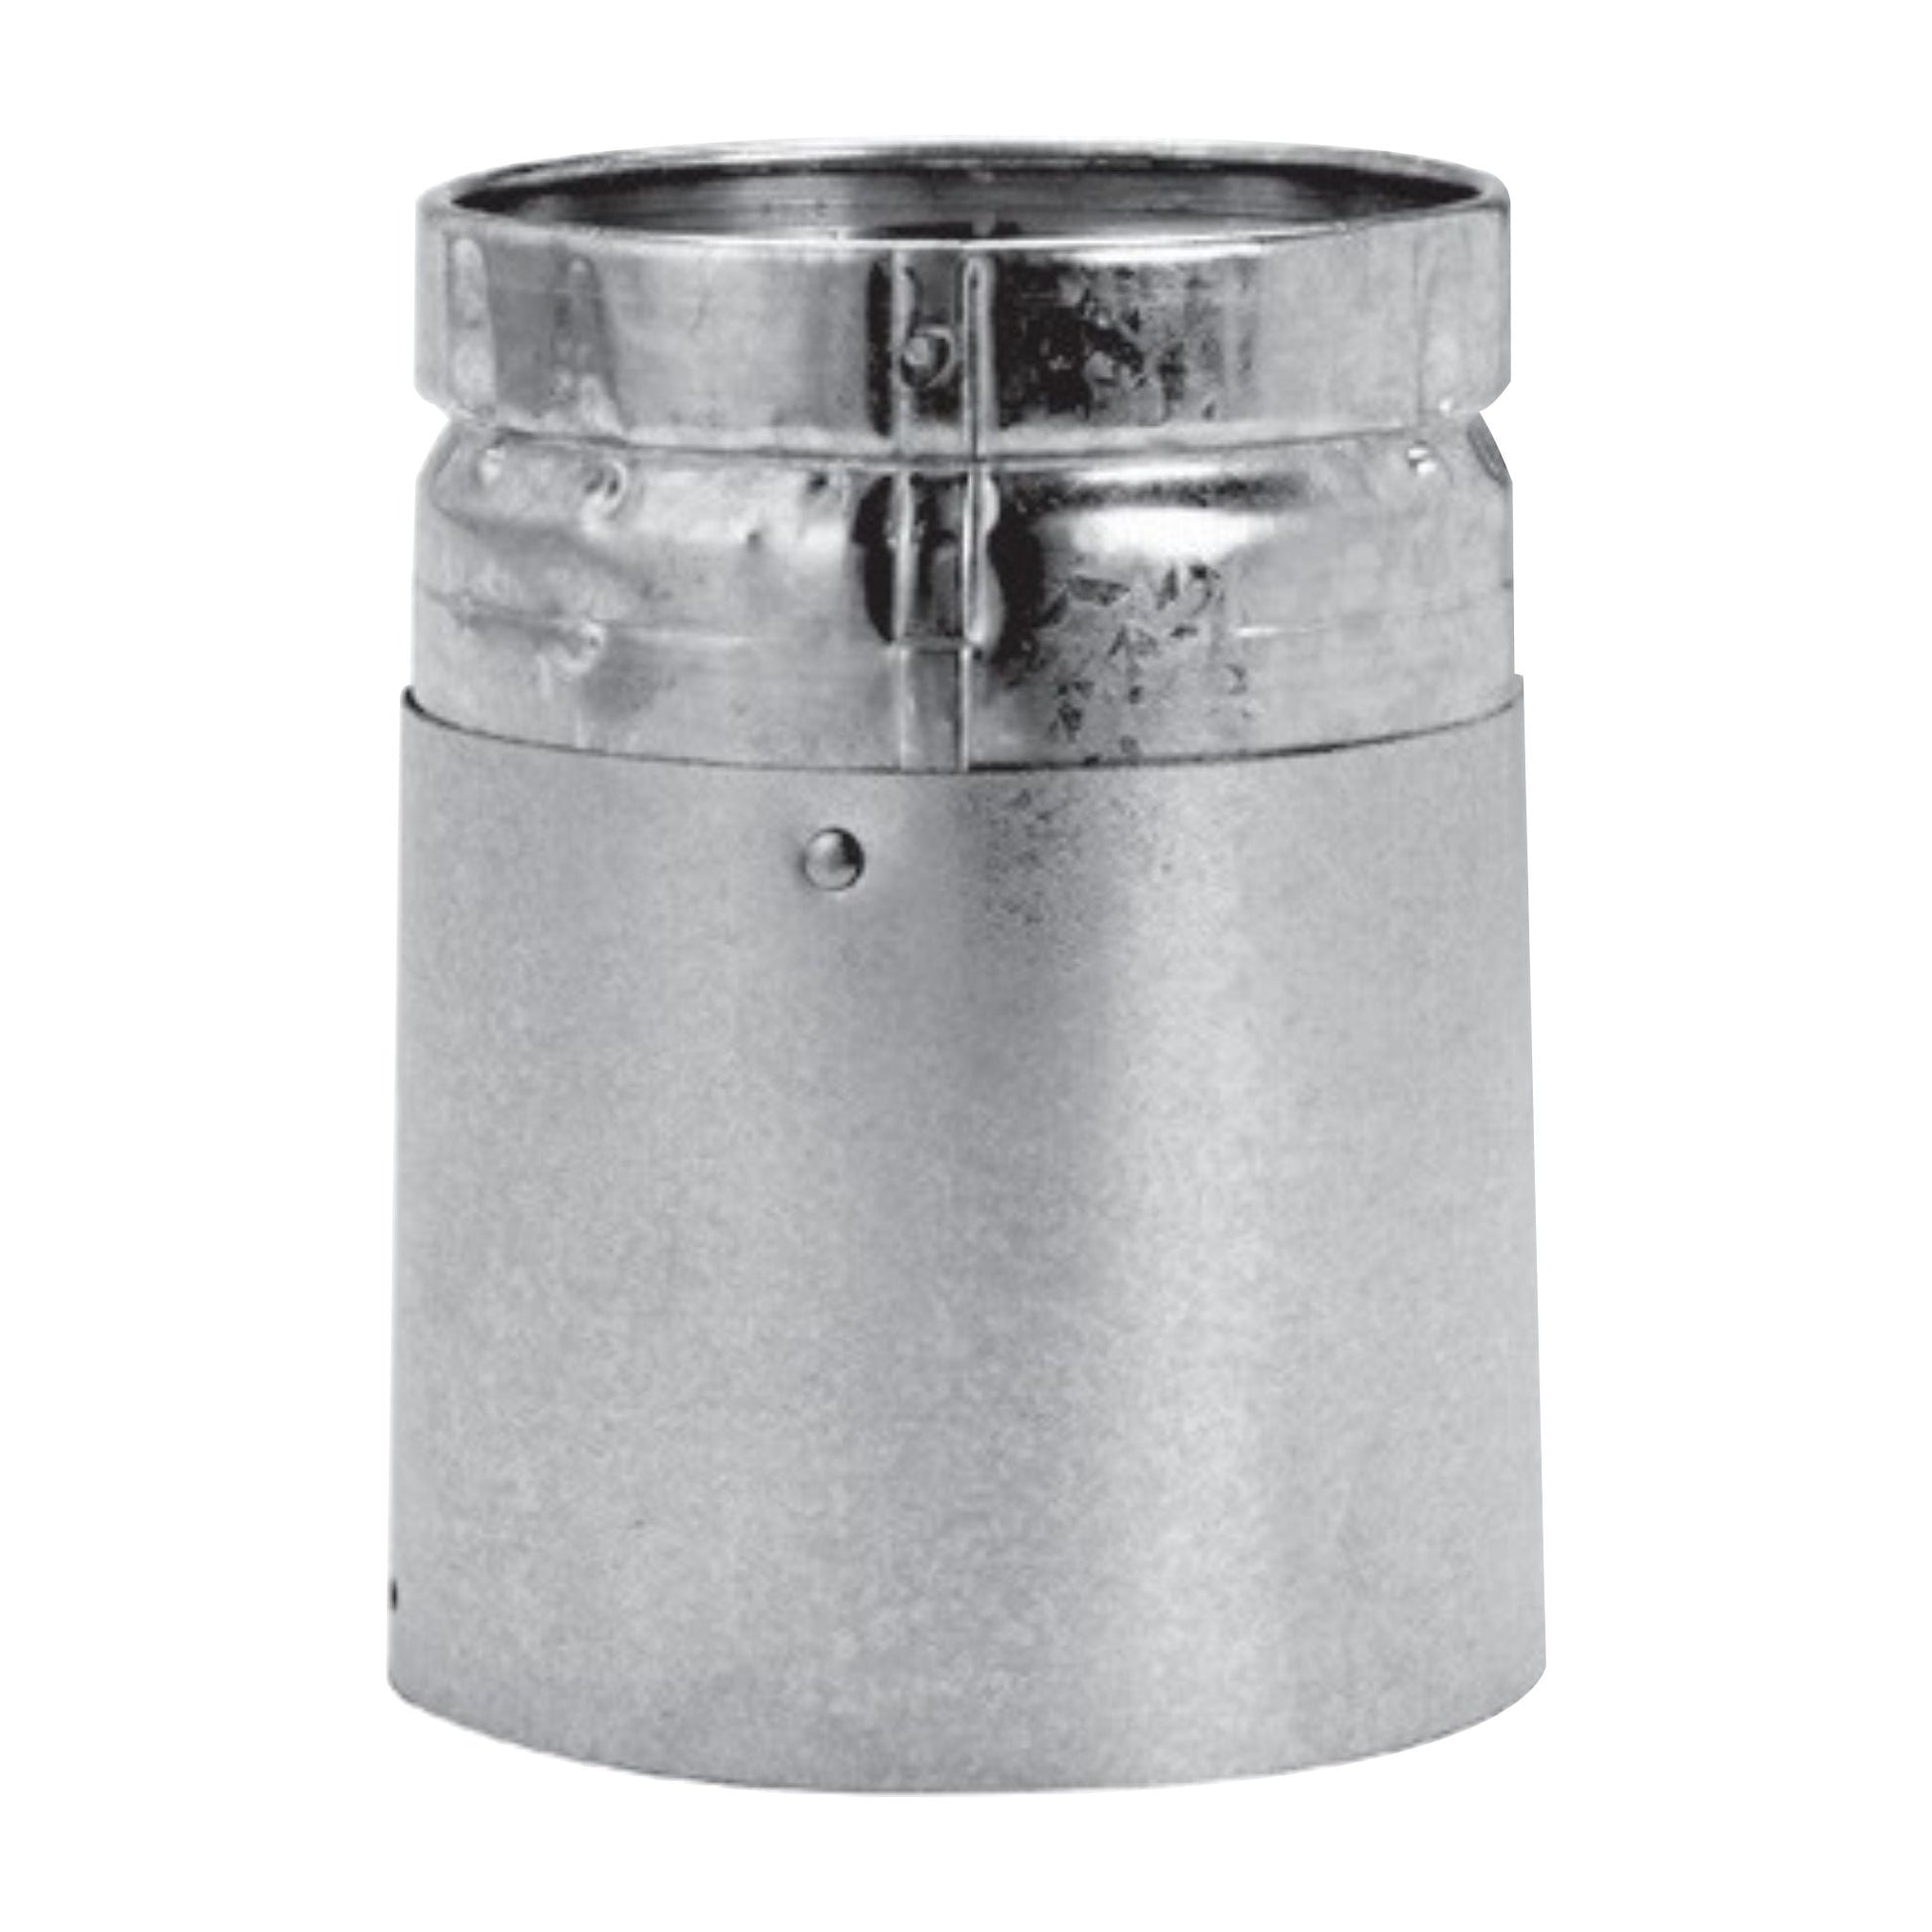 DuraVent Round Type B Gas Vent Model BV 3" - 8" Universal Male Adapter